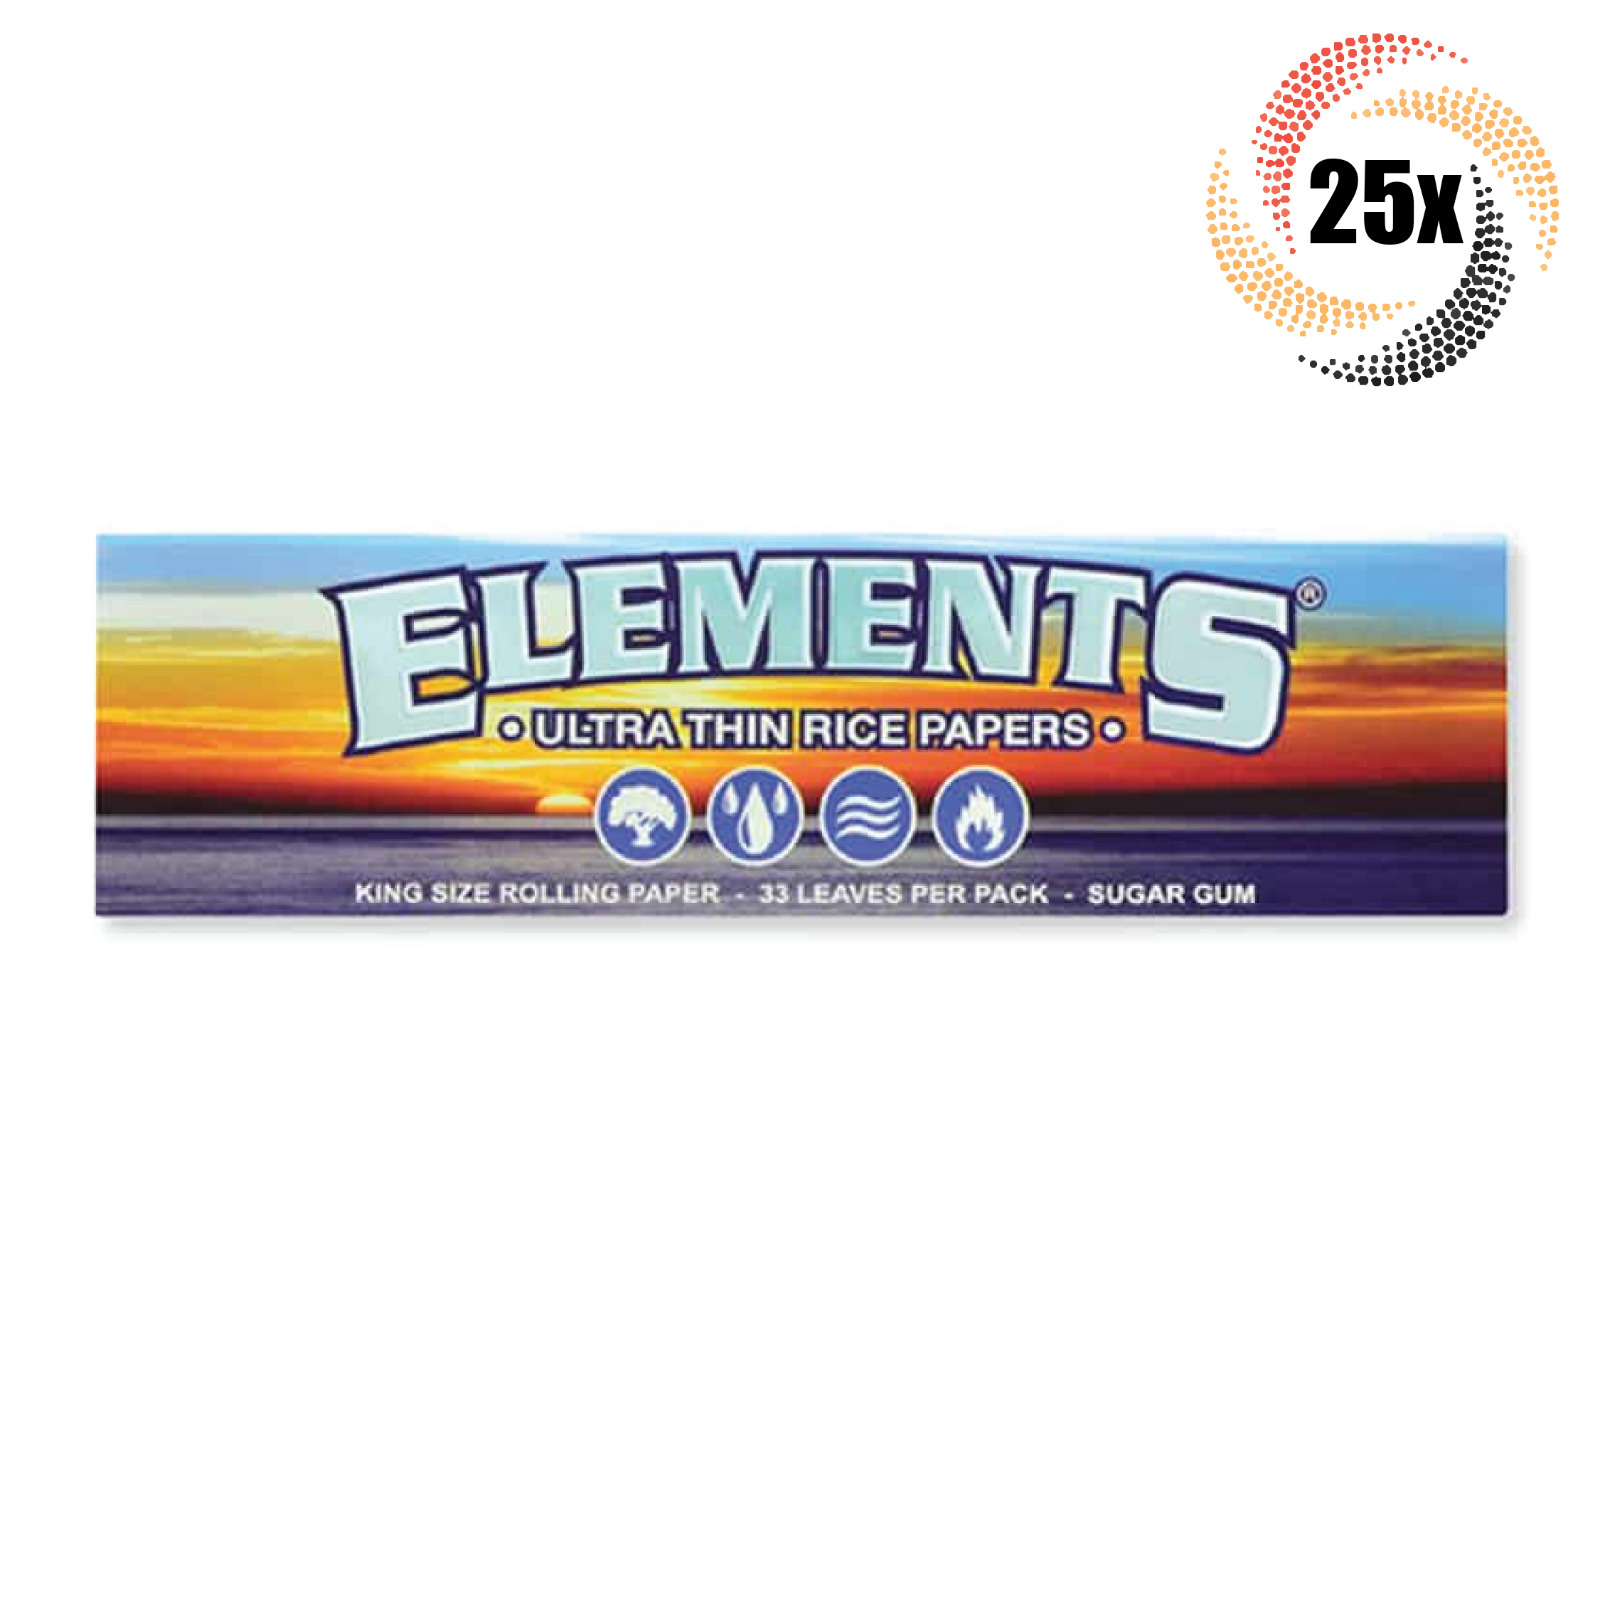 25x Packs Elements Ultra Thin King Size | 33 Papers Each | 2 Free Rolling Tubes